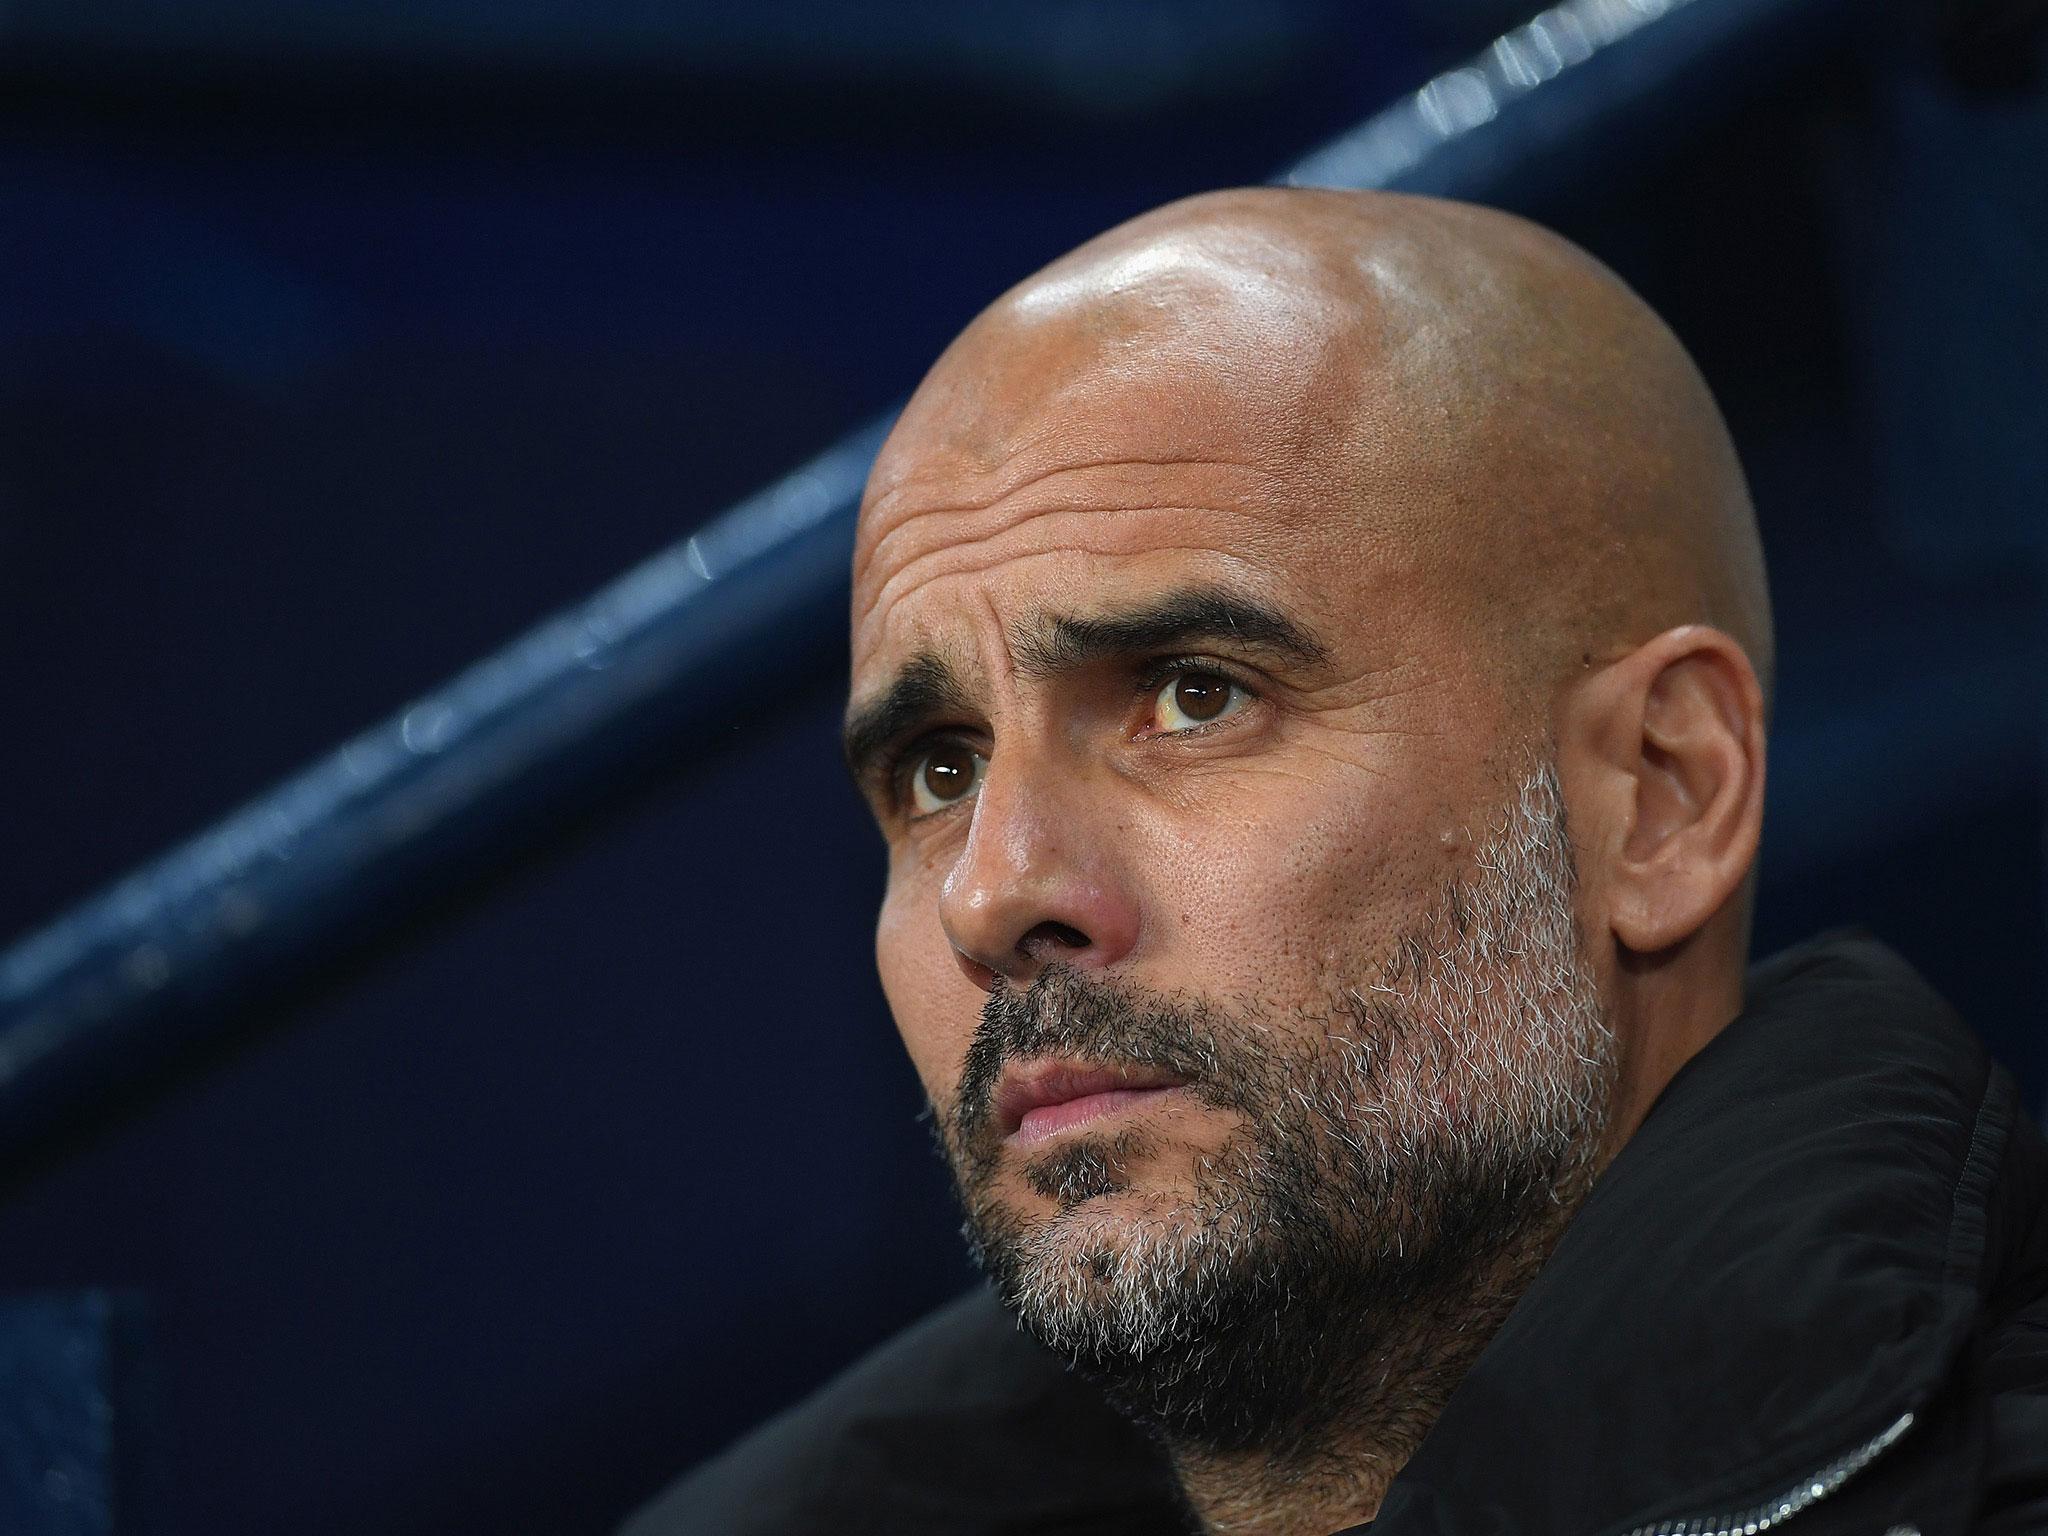 Pep Guardiola said Sunday's opponents were a quality side